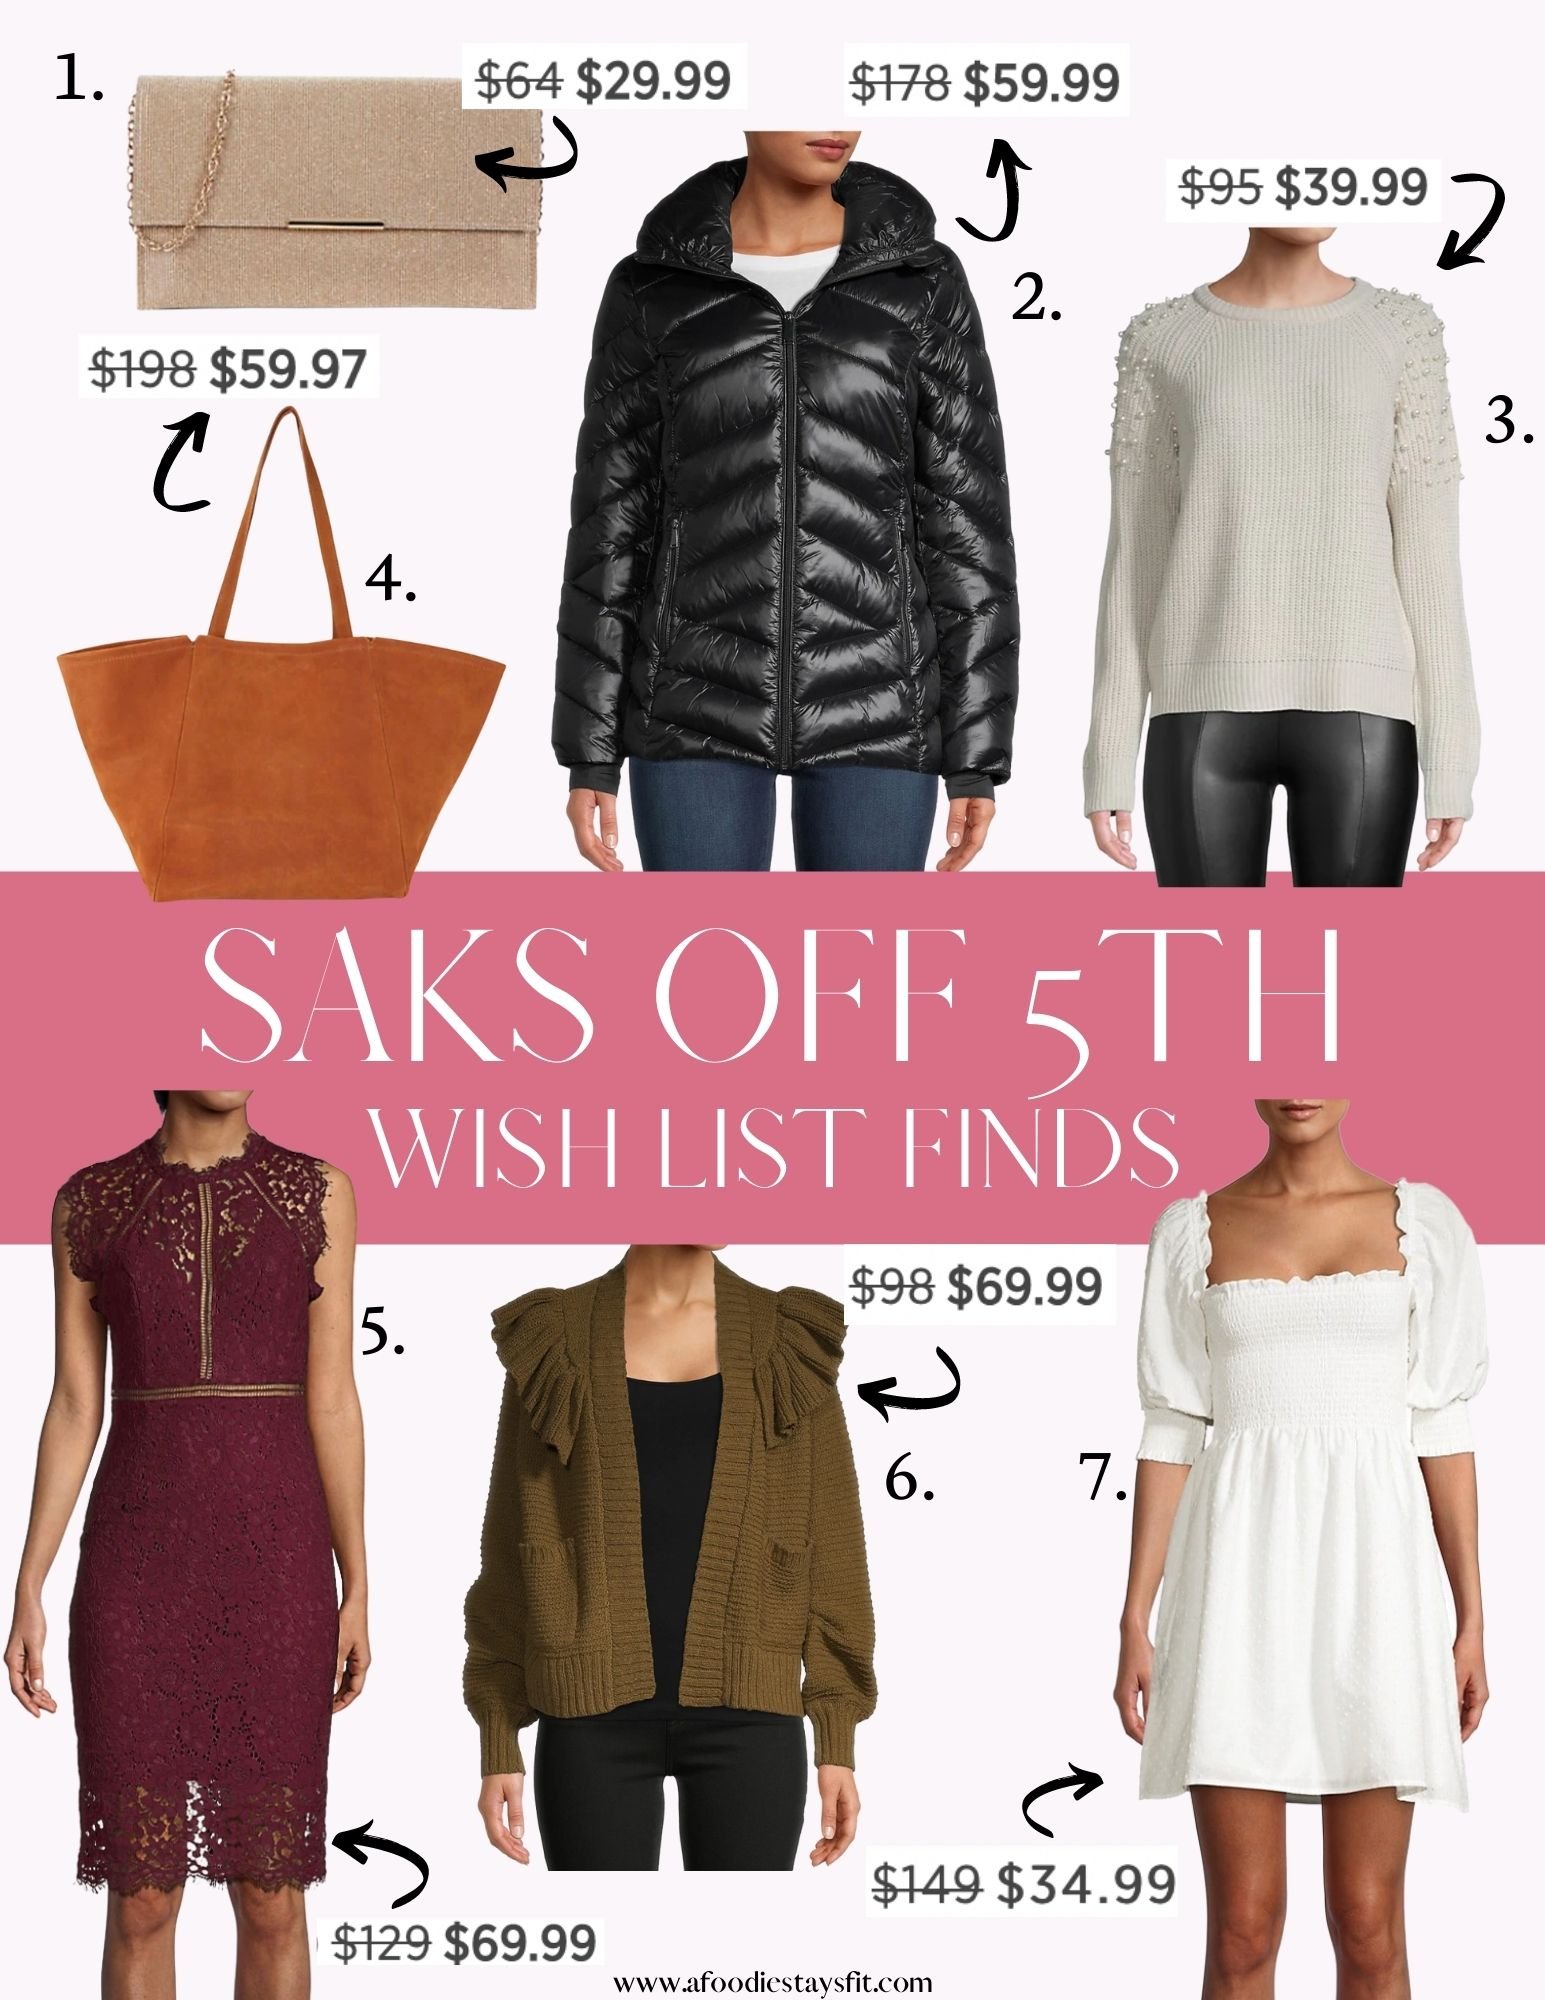 Gifts from Saks Off 5th - 2021 Gift Guides